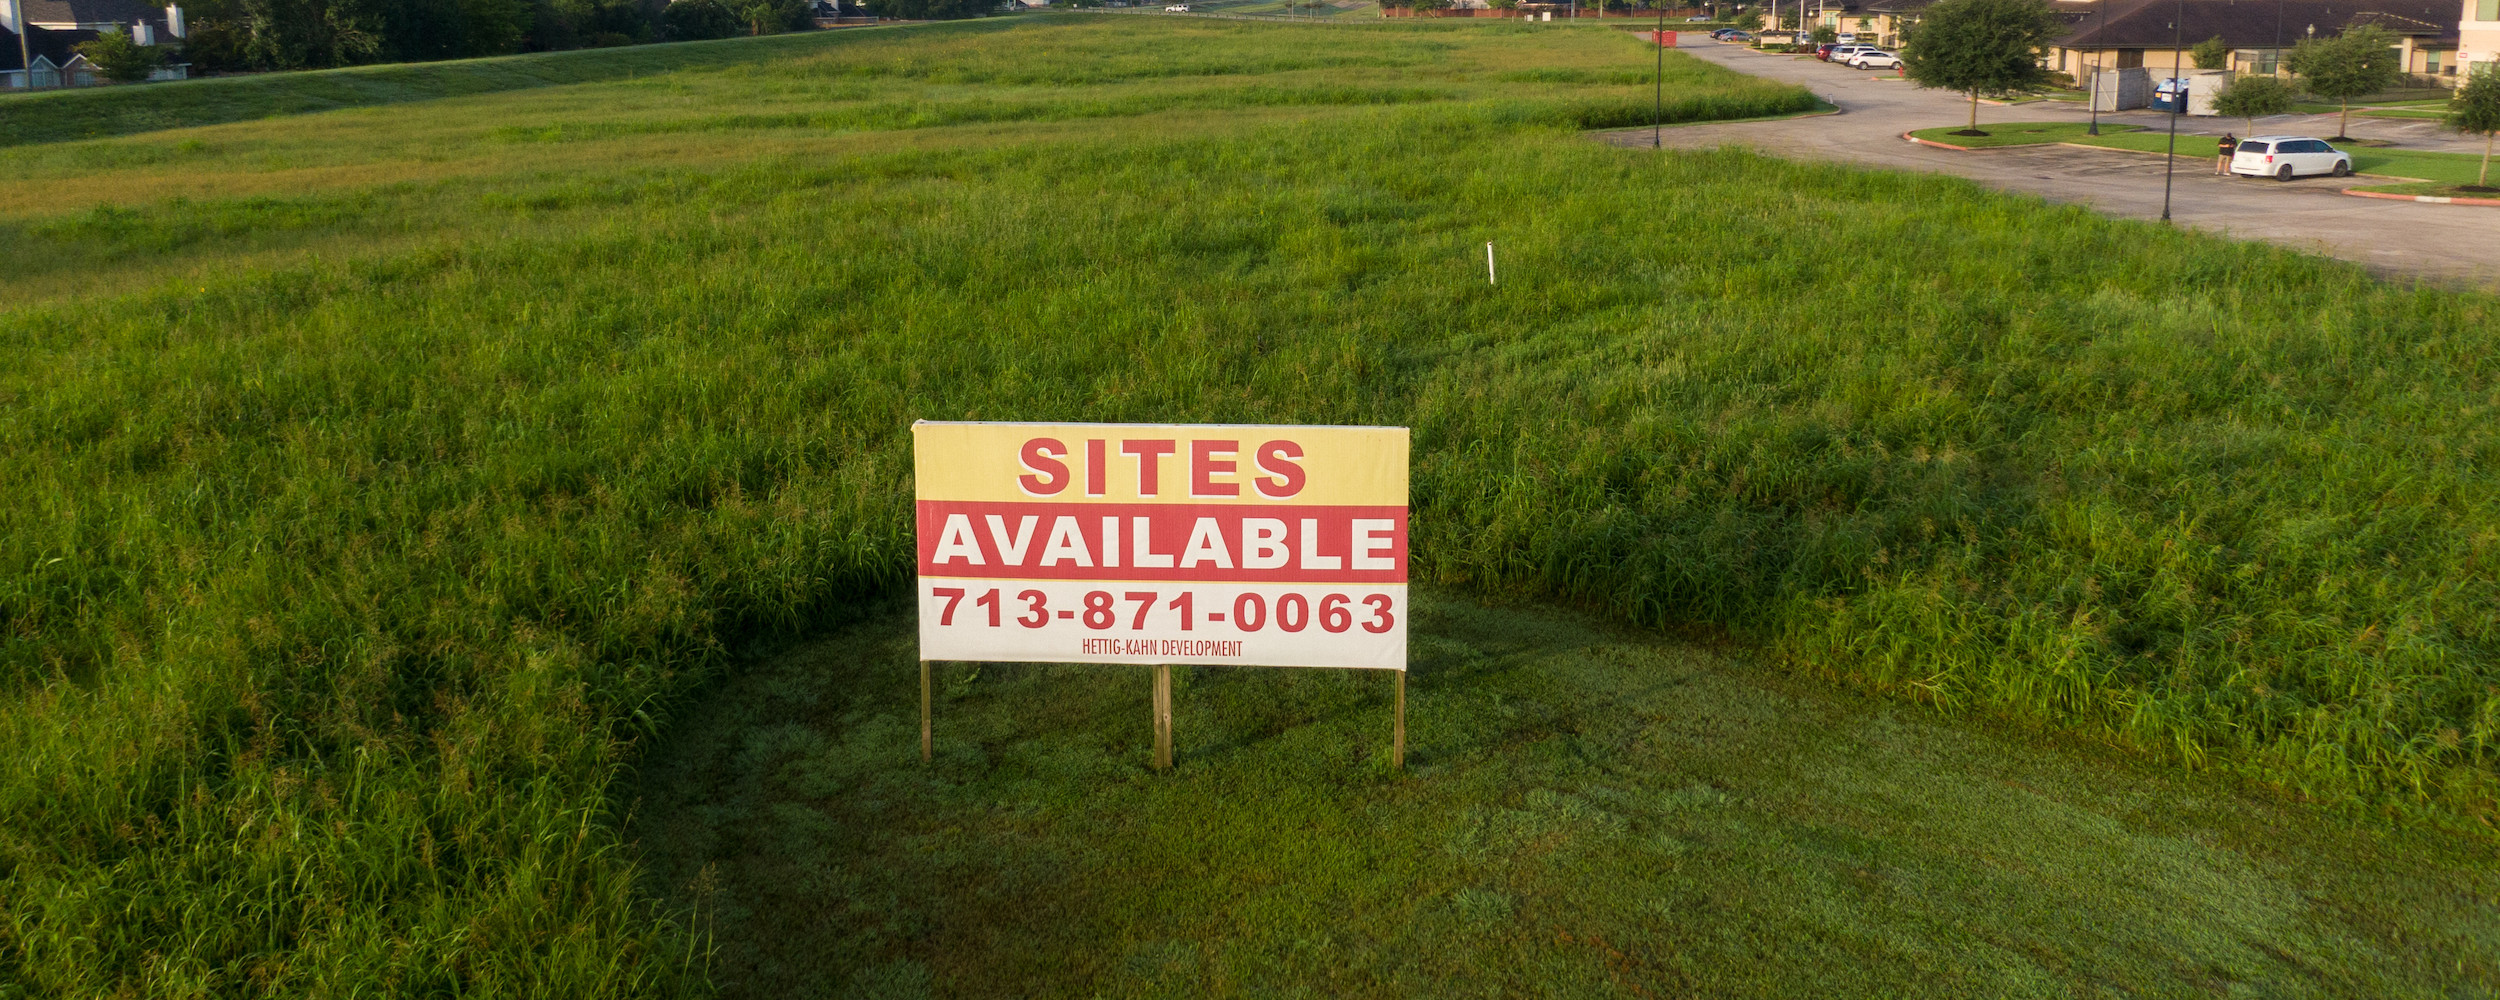 Photo of empty lot with "sites available" sign